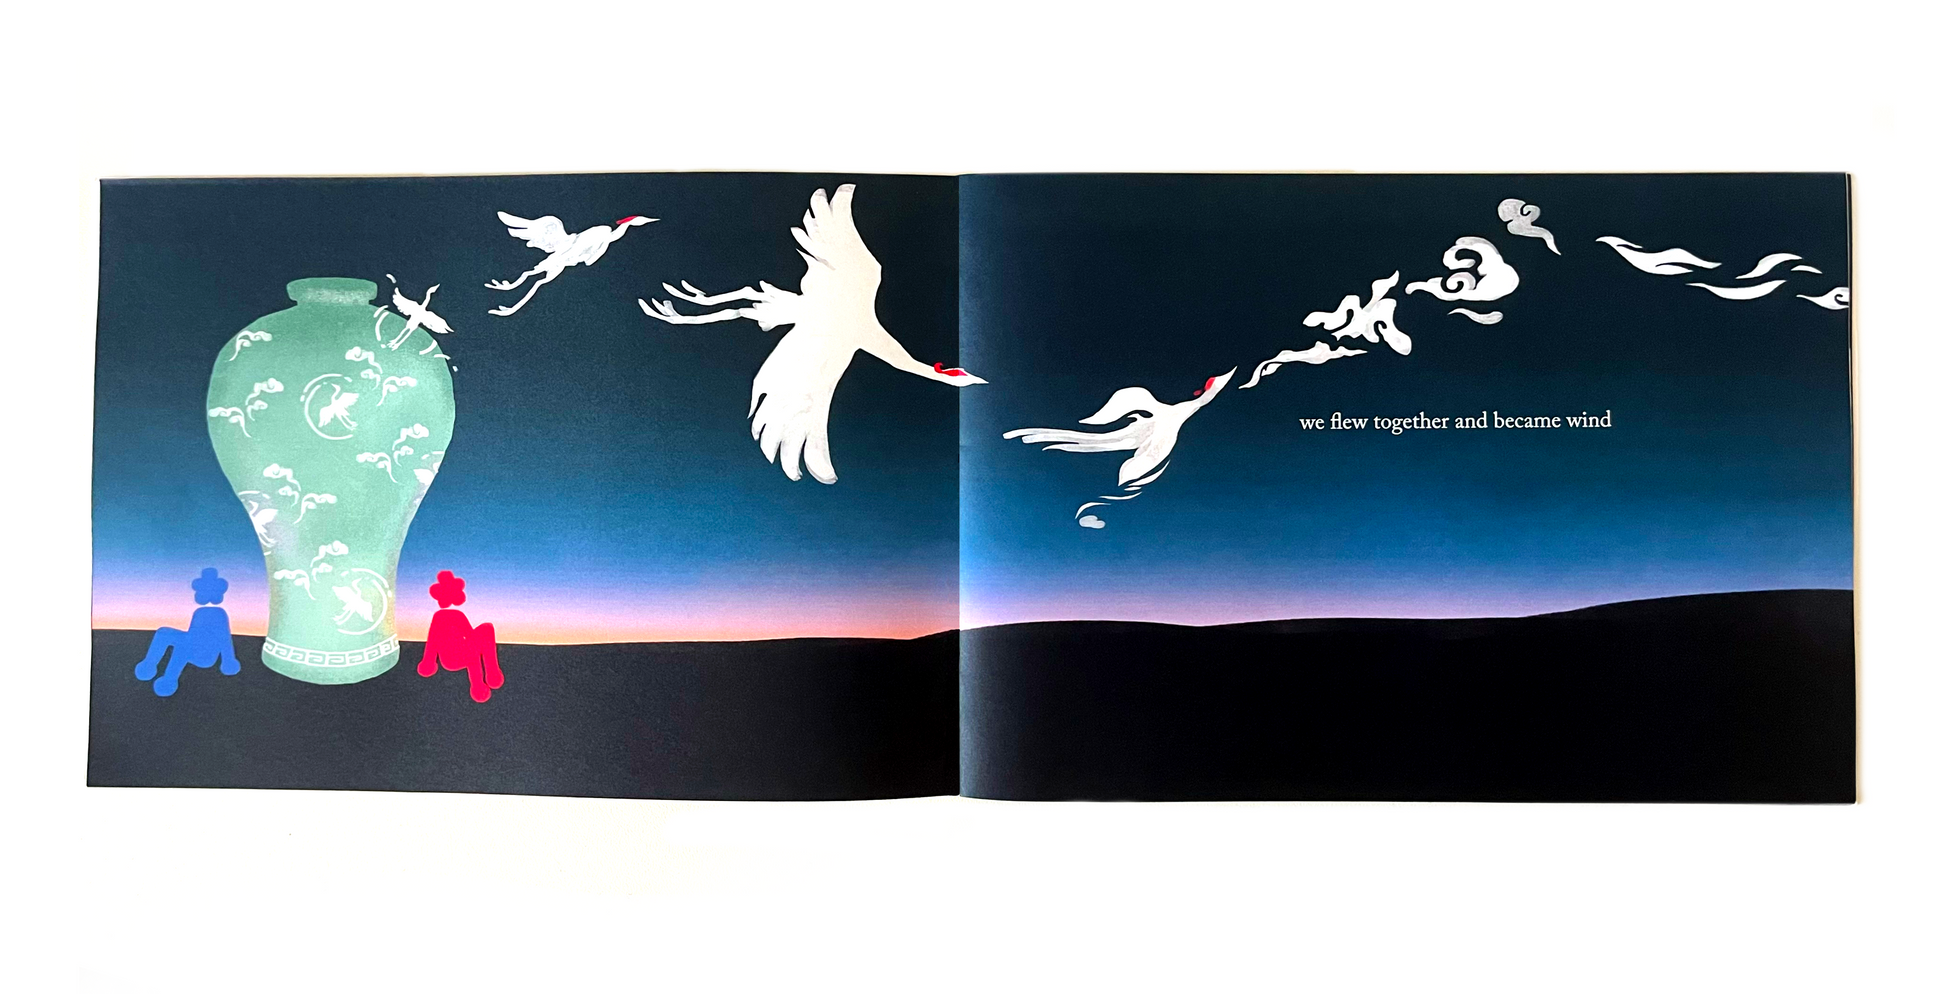 A spread of pages from sea and sky zine. Two figures, one red and one blue, with flower shaped heads sit side by side a celadon vase decorated with cranes and clouds. Against the sunrise, cranes fly out of the vase and into the sky. The text reads, "we flew together and became wind." sea and sky zine is about community found through dreams and the fold over of past, present, and future.